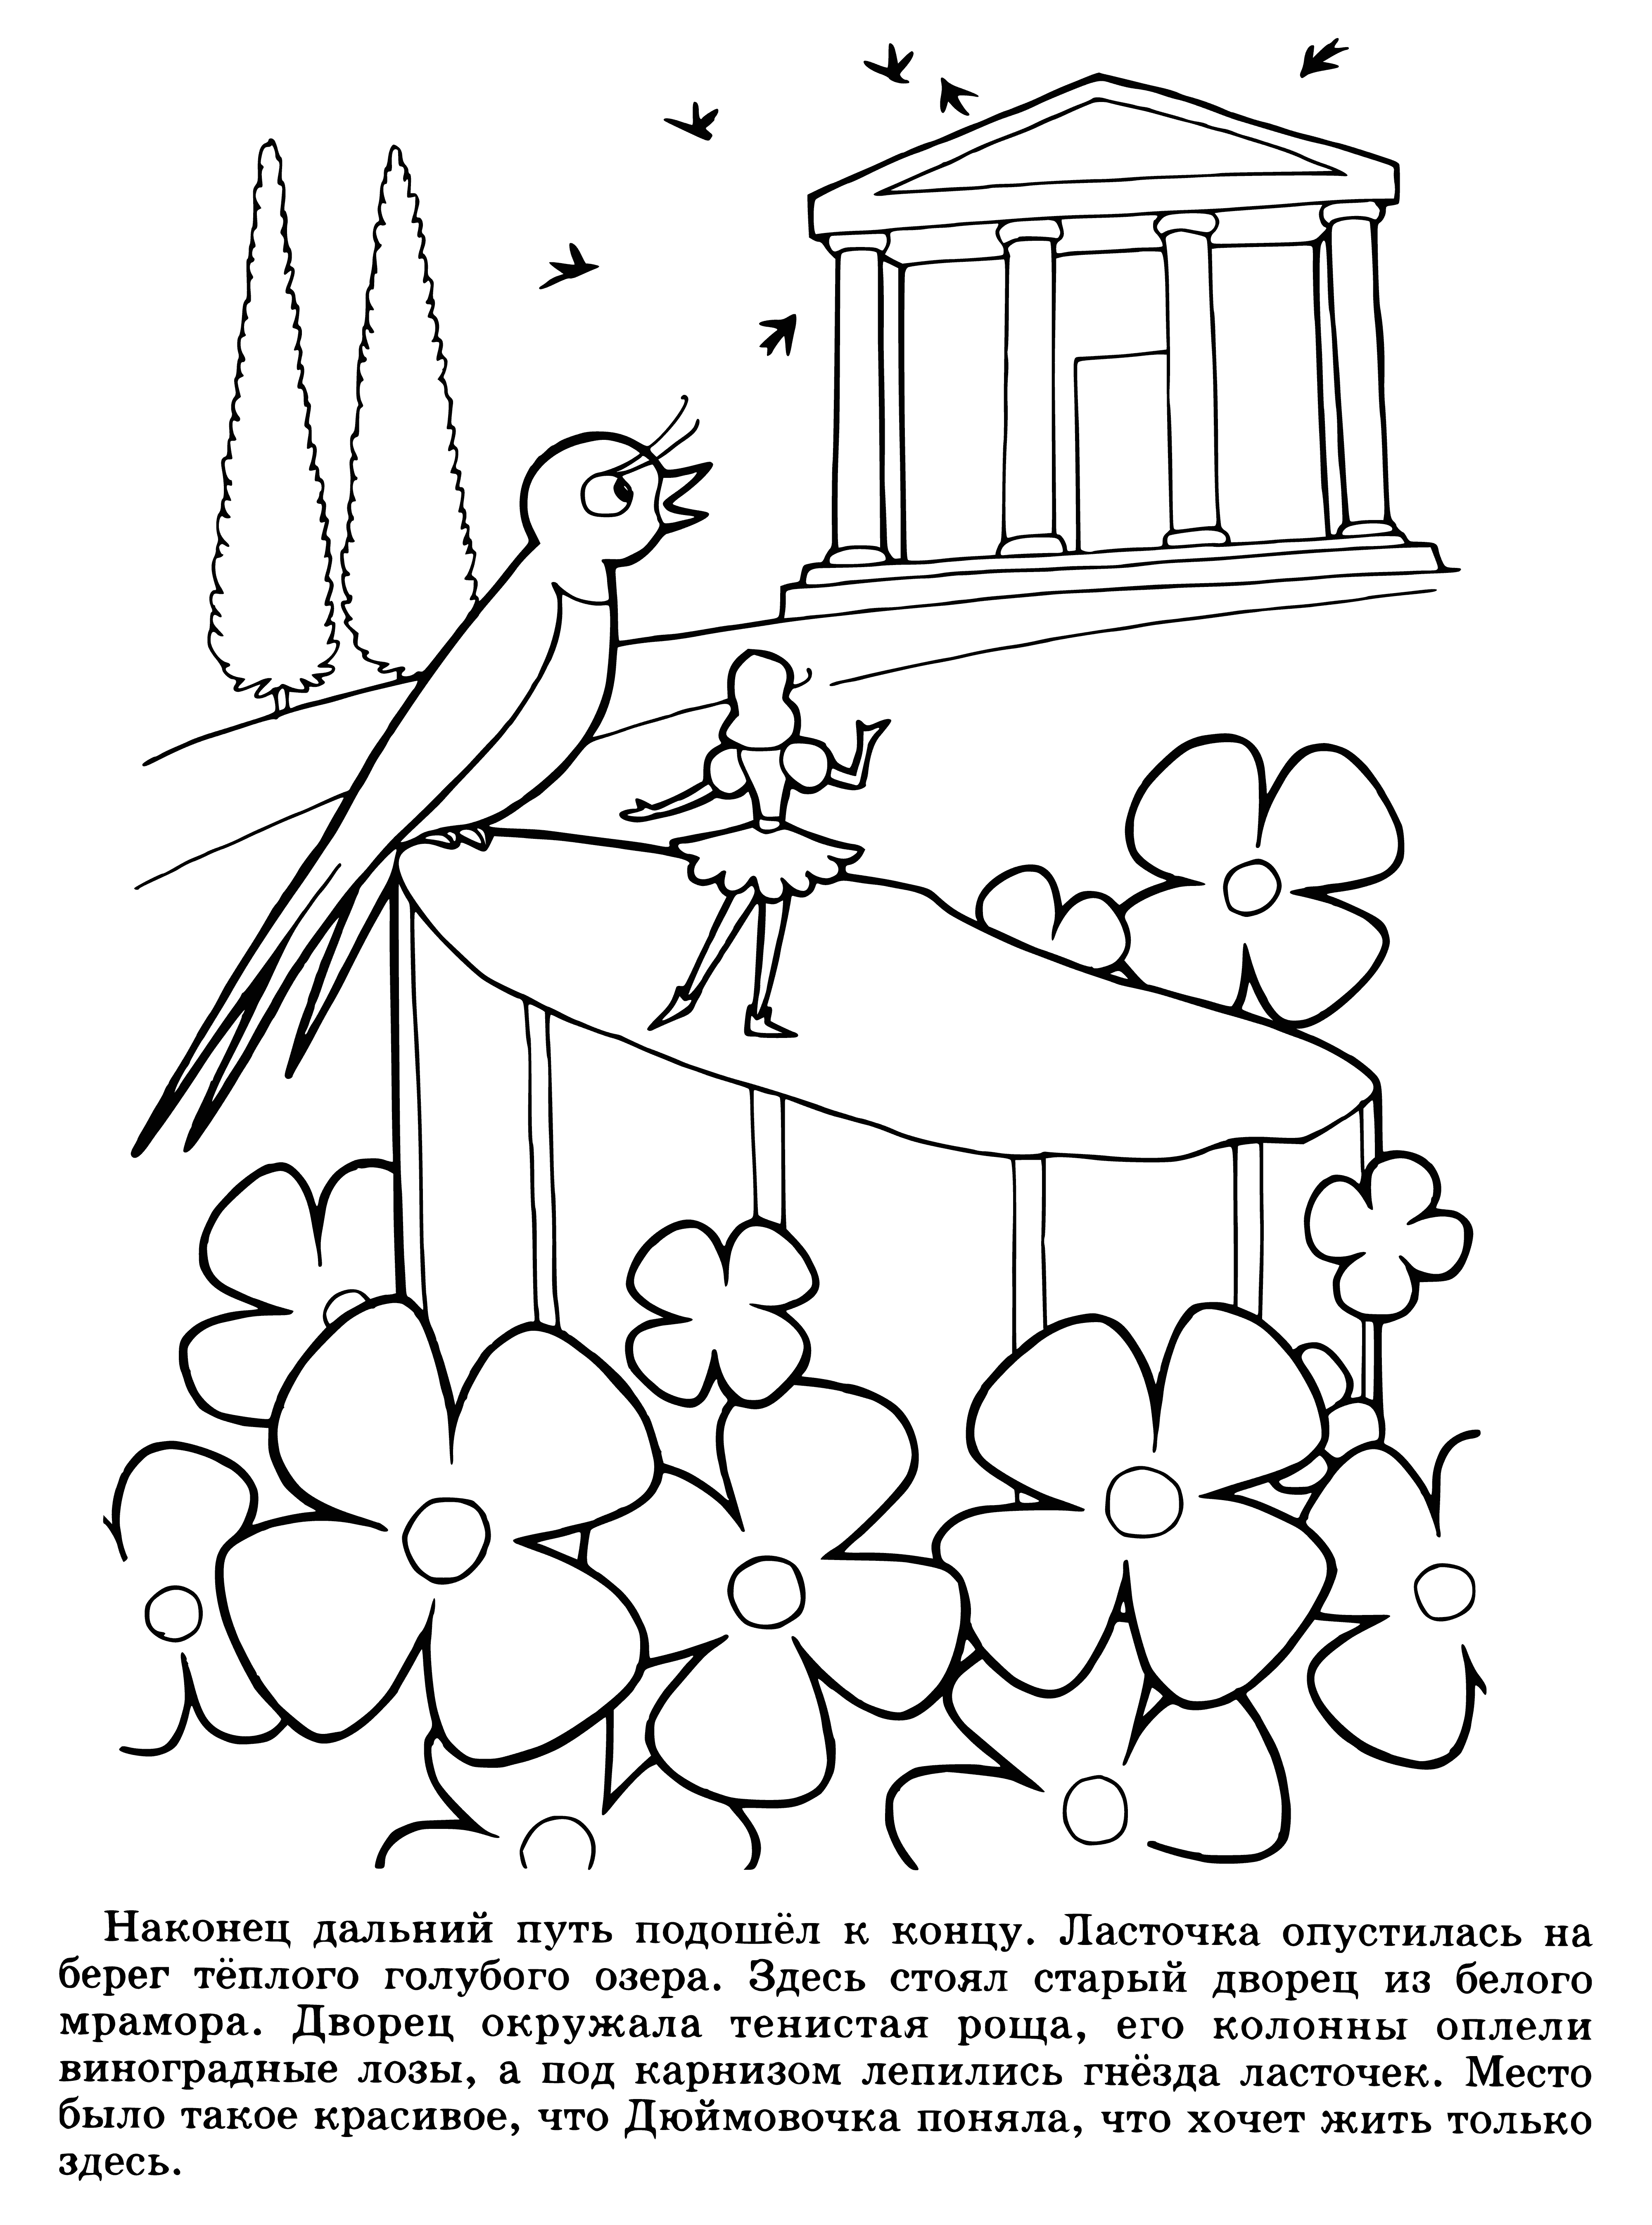 coloring page: Stacks of colorful books featuring illustrations from "The Tales of Hans Christian Andersen", with a green ribbon bookmark sticking out of one of them.